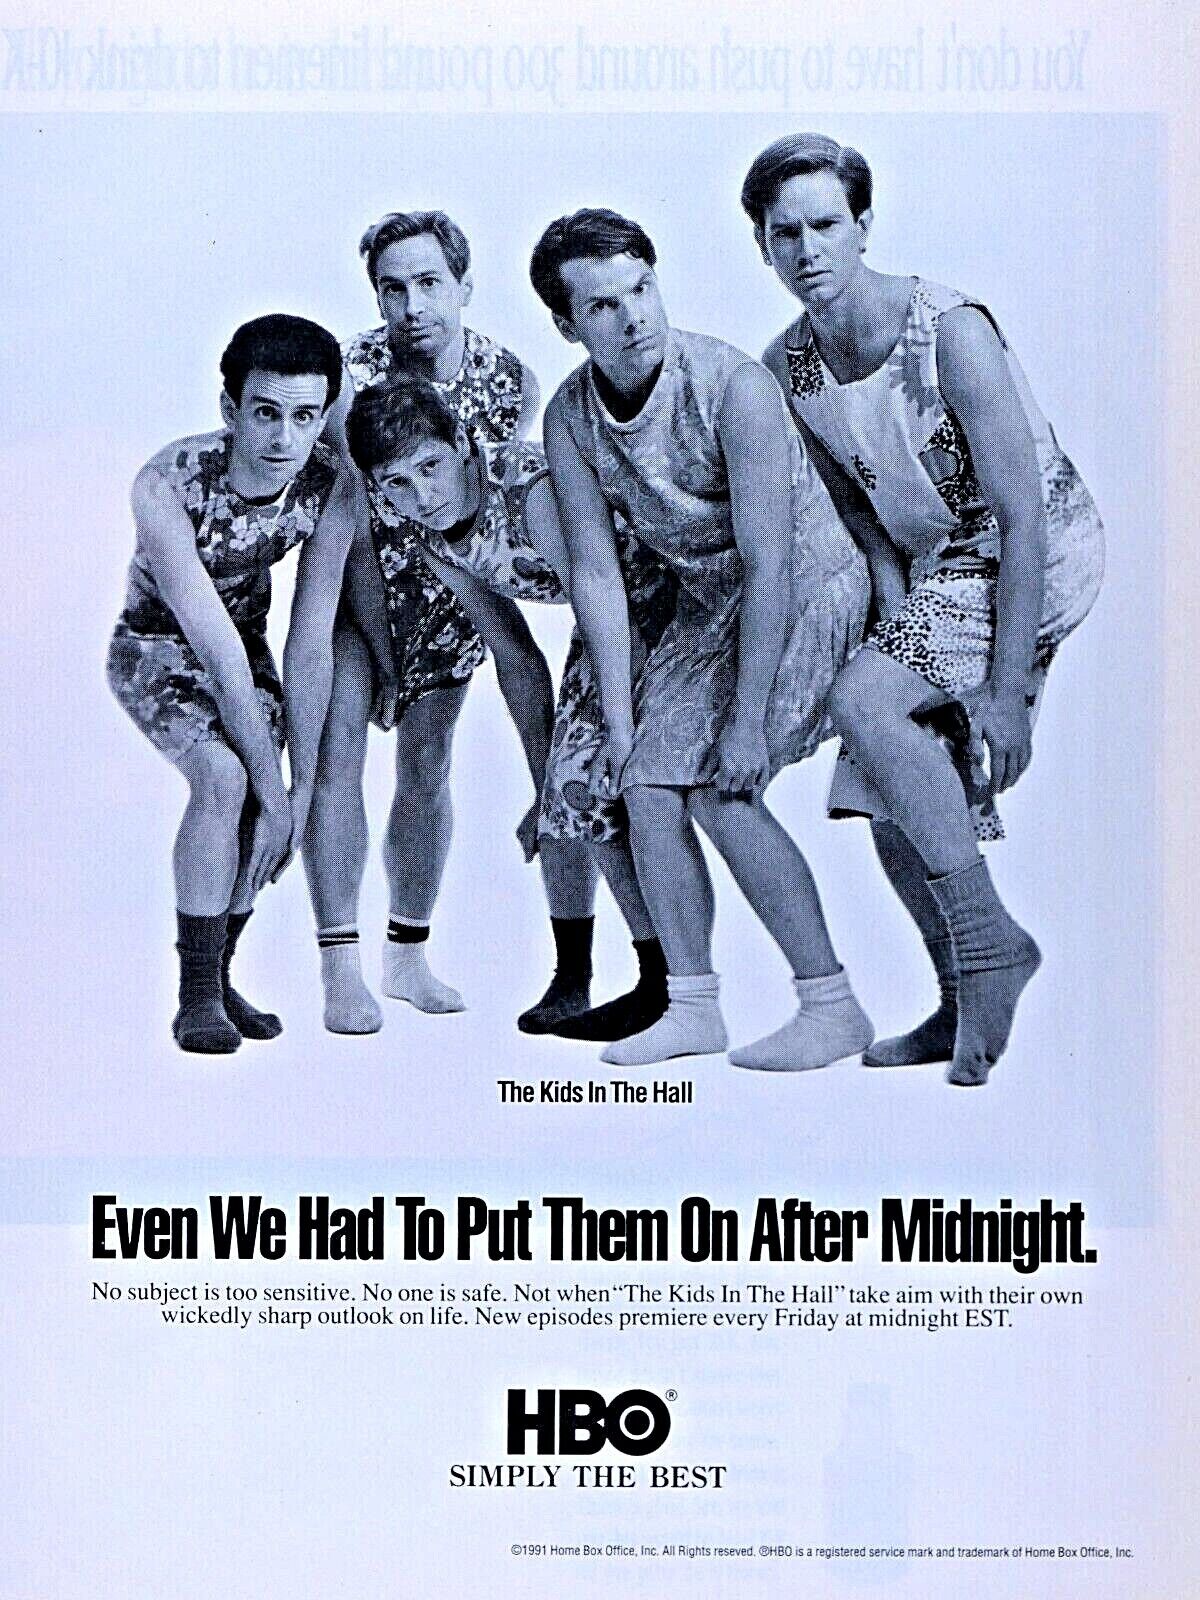 The Kids In The Hall Vintage 1991 HBO Original Print Ad 8.5 x 10.5